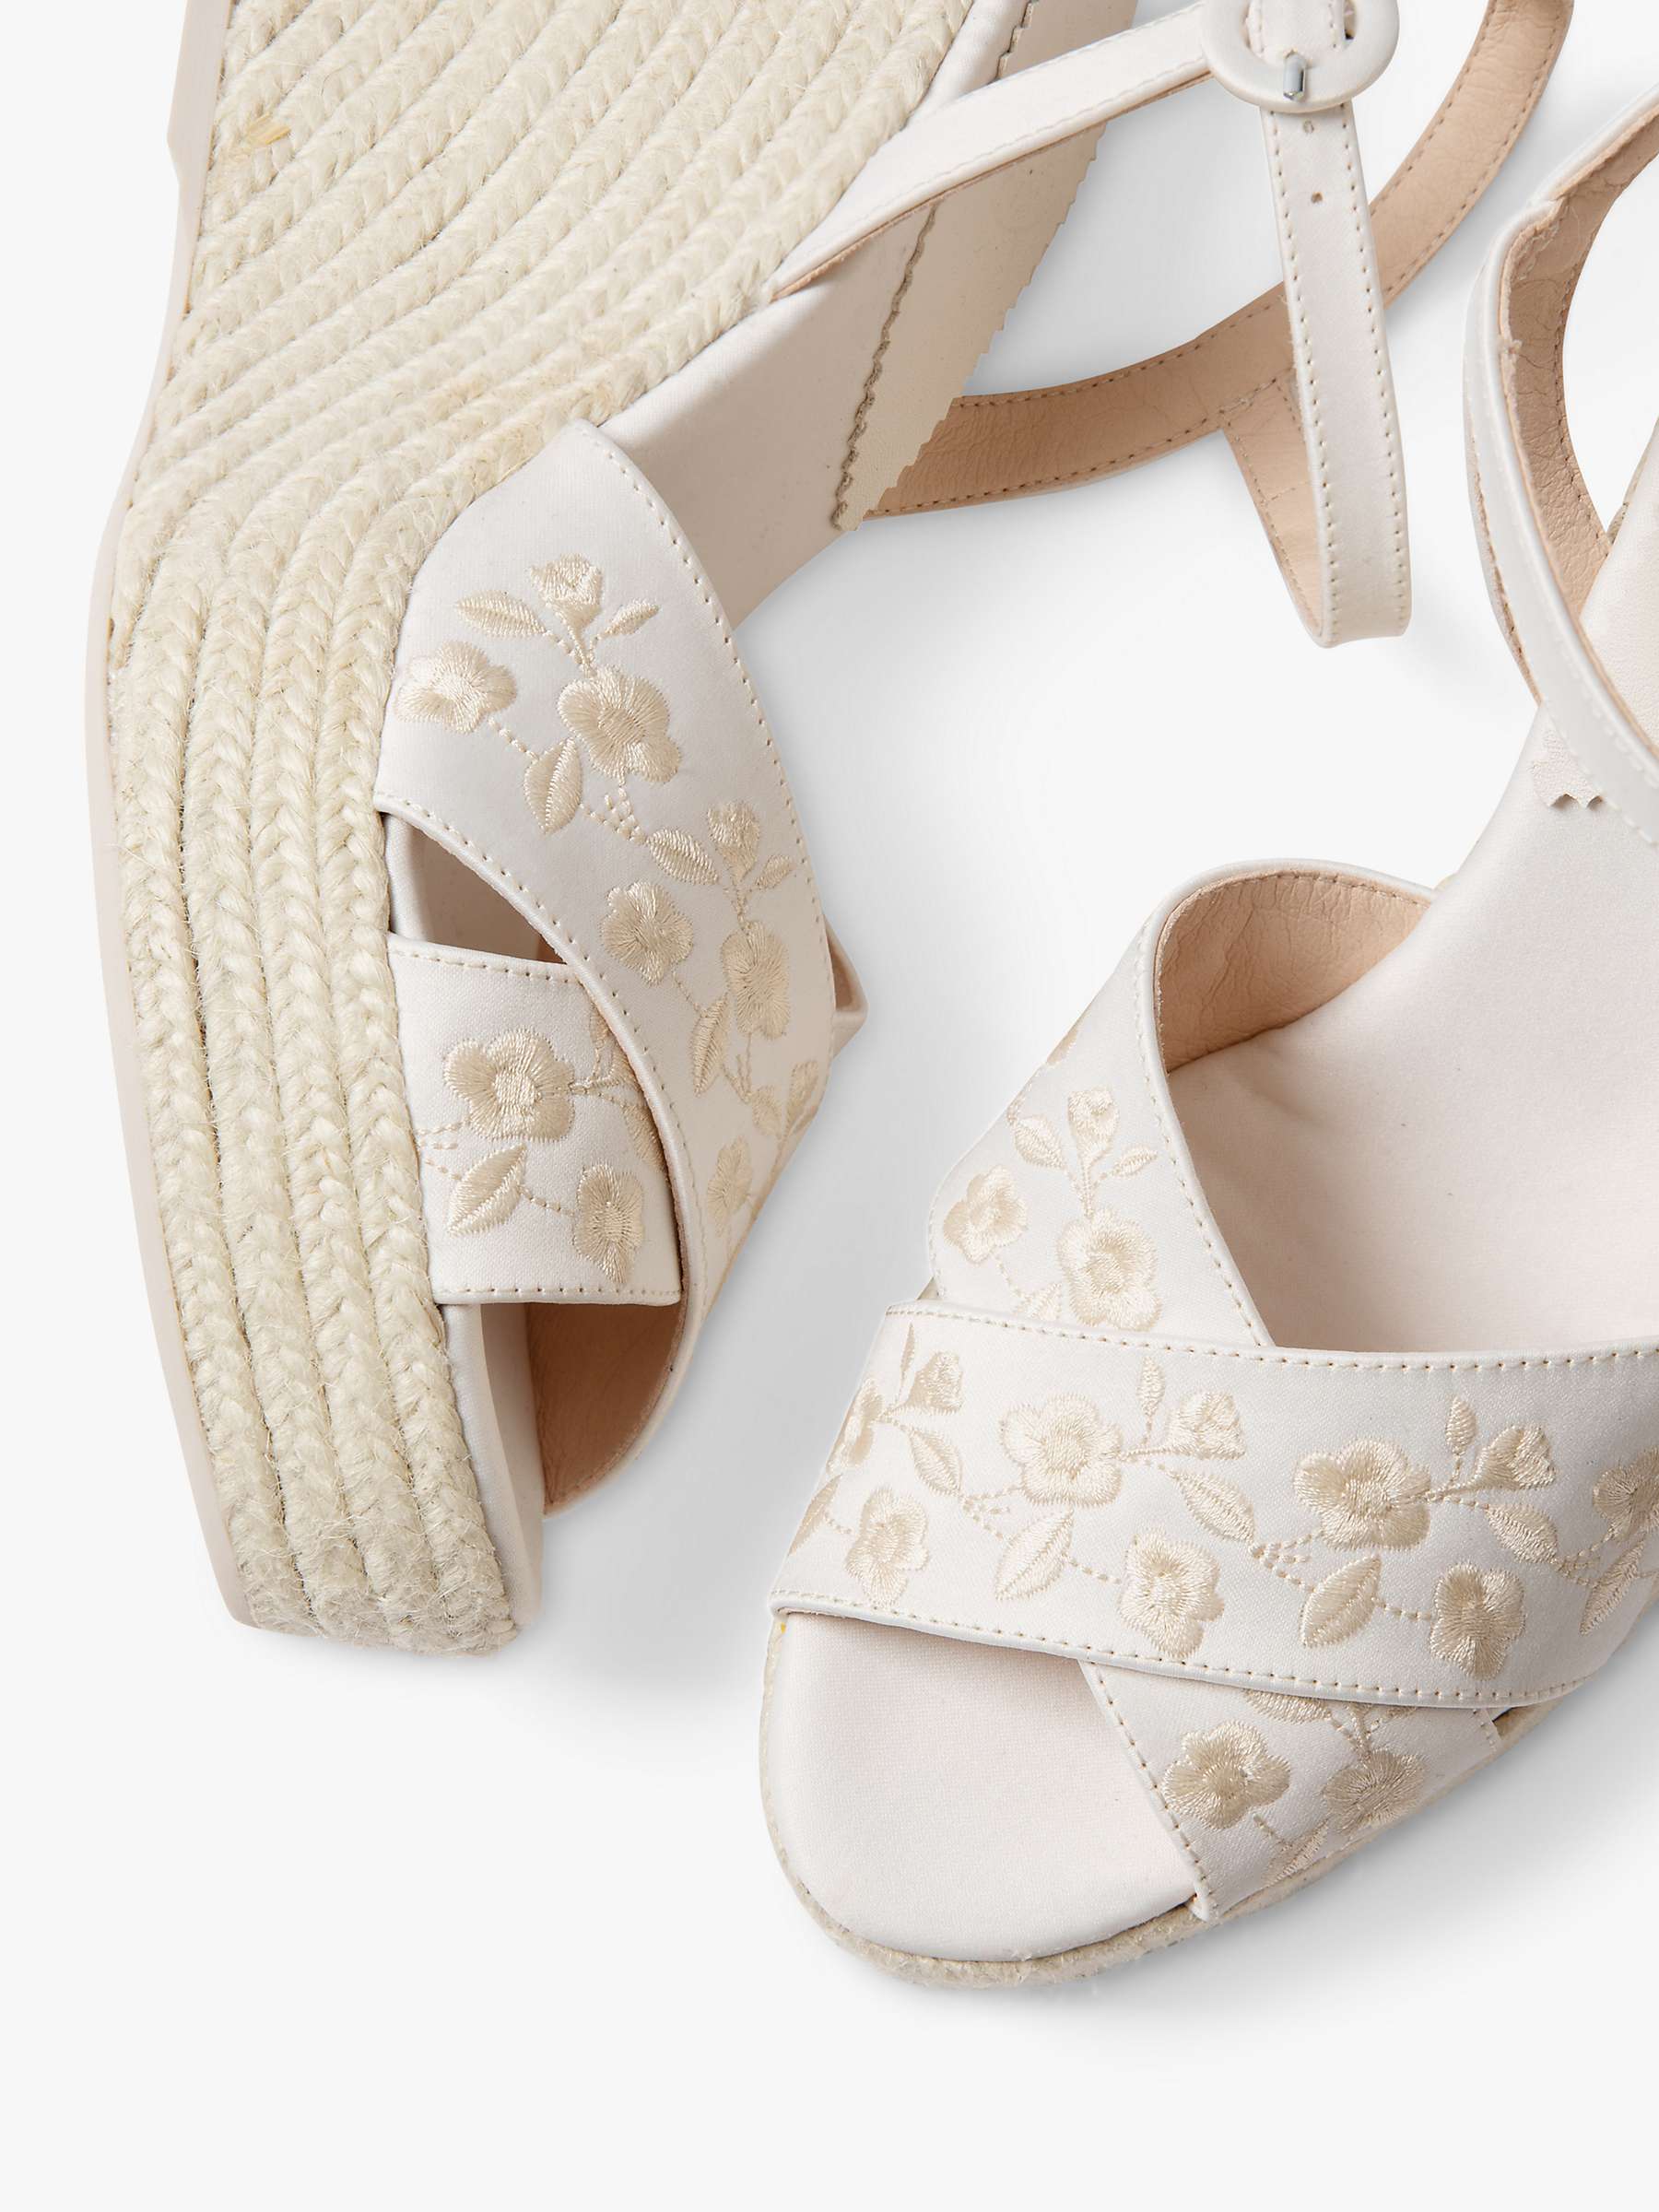 Buy Penelope Chilvers Santorini Embroidered Wedge Sandals, Ivory Online at johnlewis.com